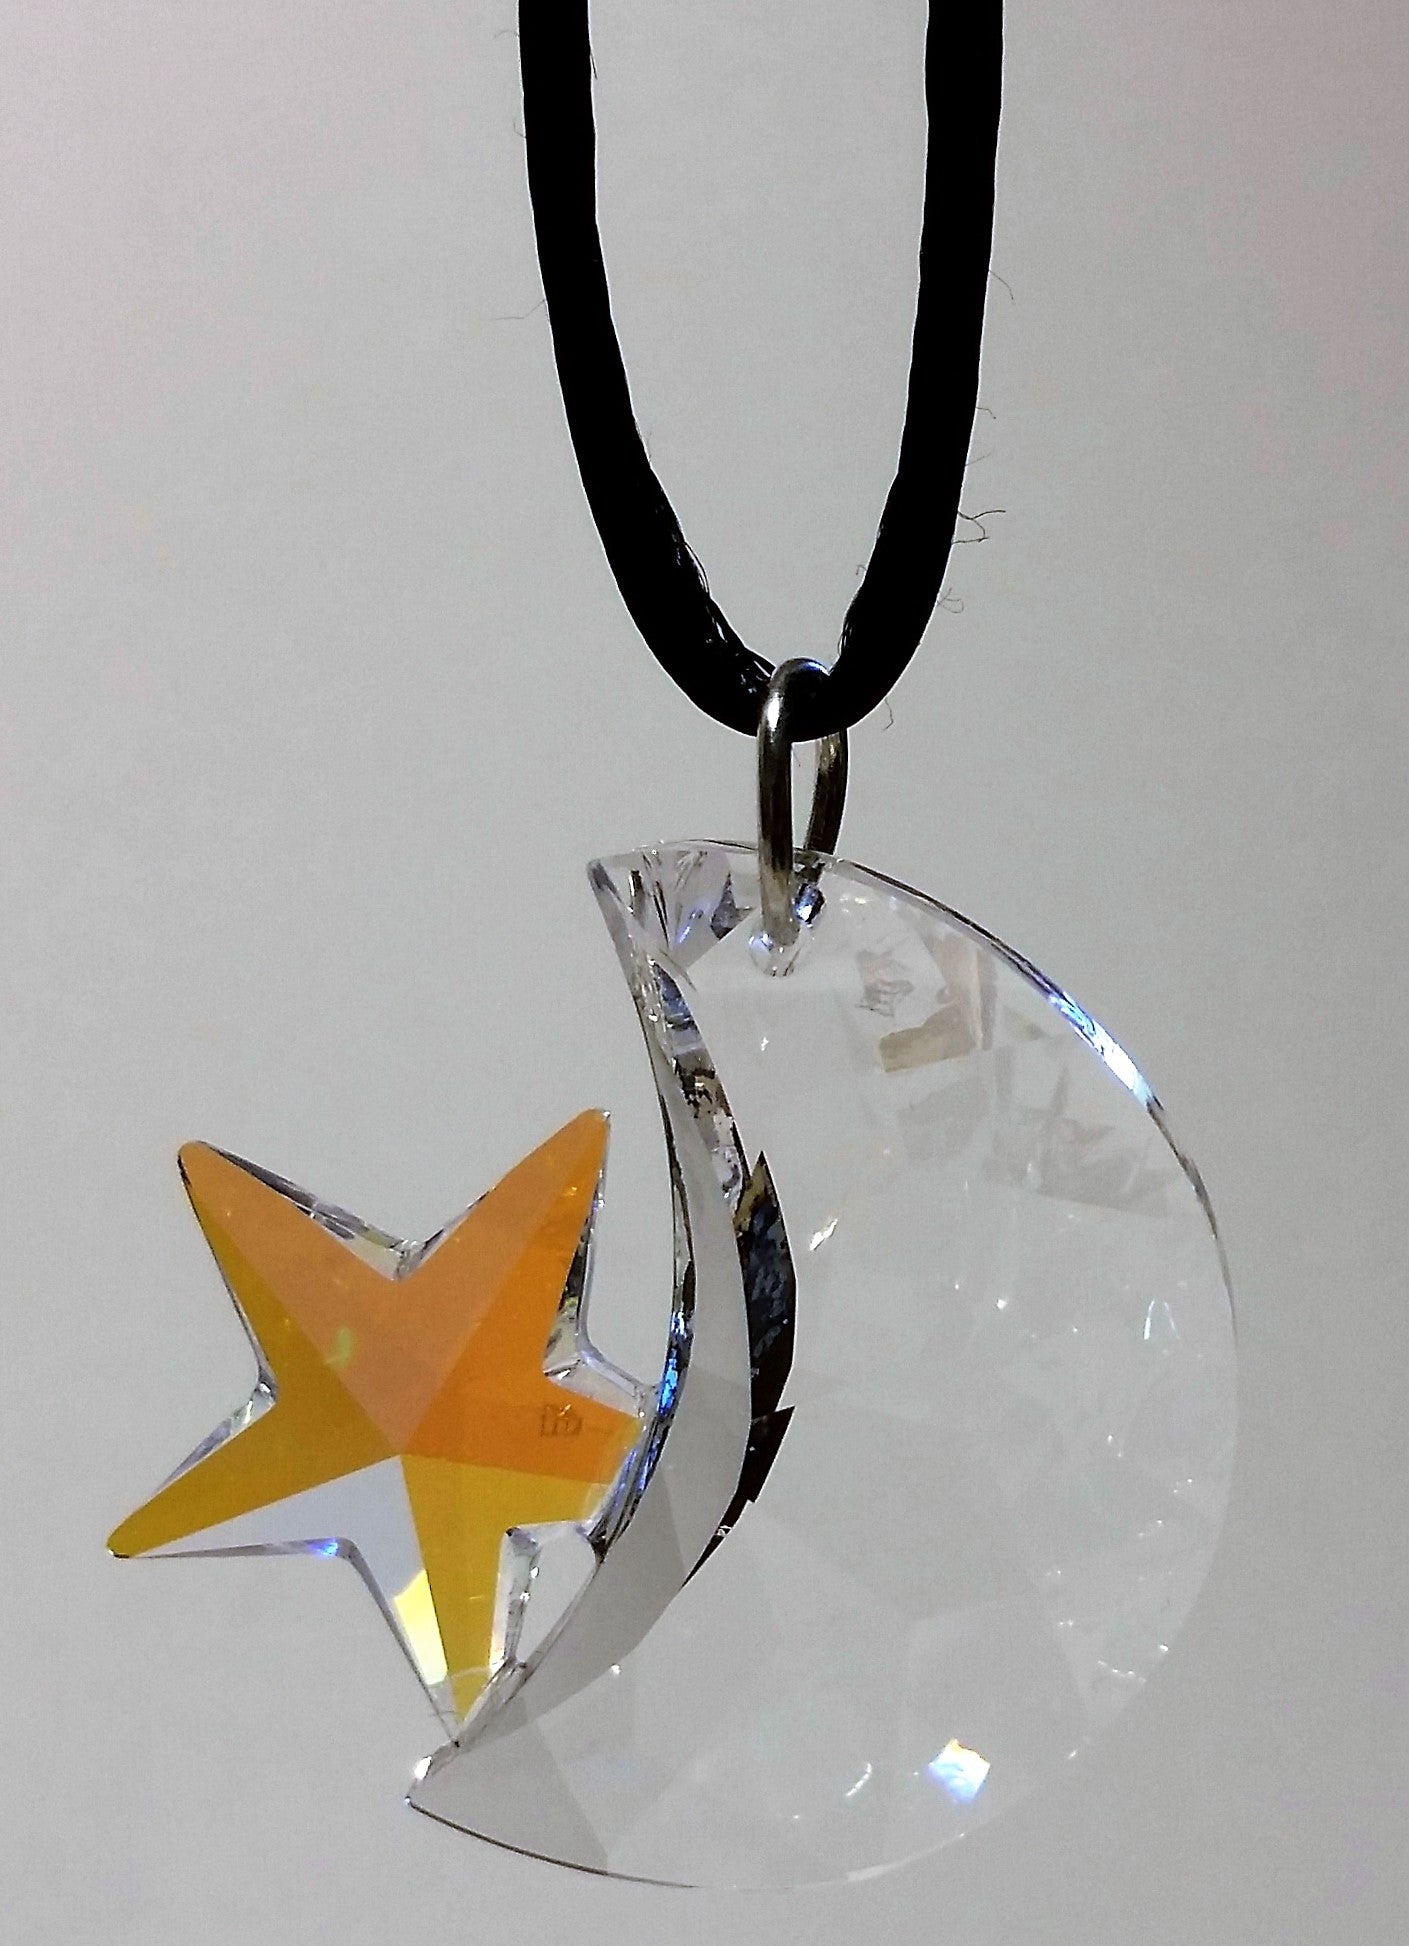 Crystal Moon And Star Necklace Handcrafted Using Swarovski Crystal